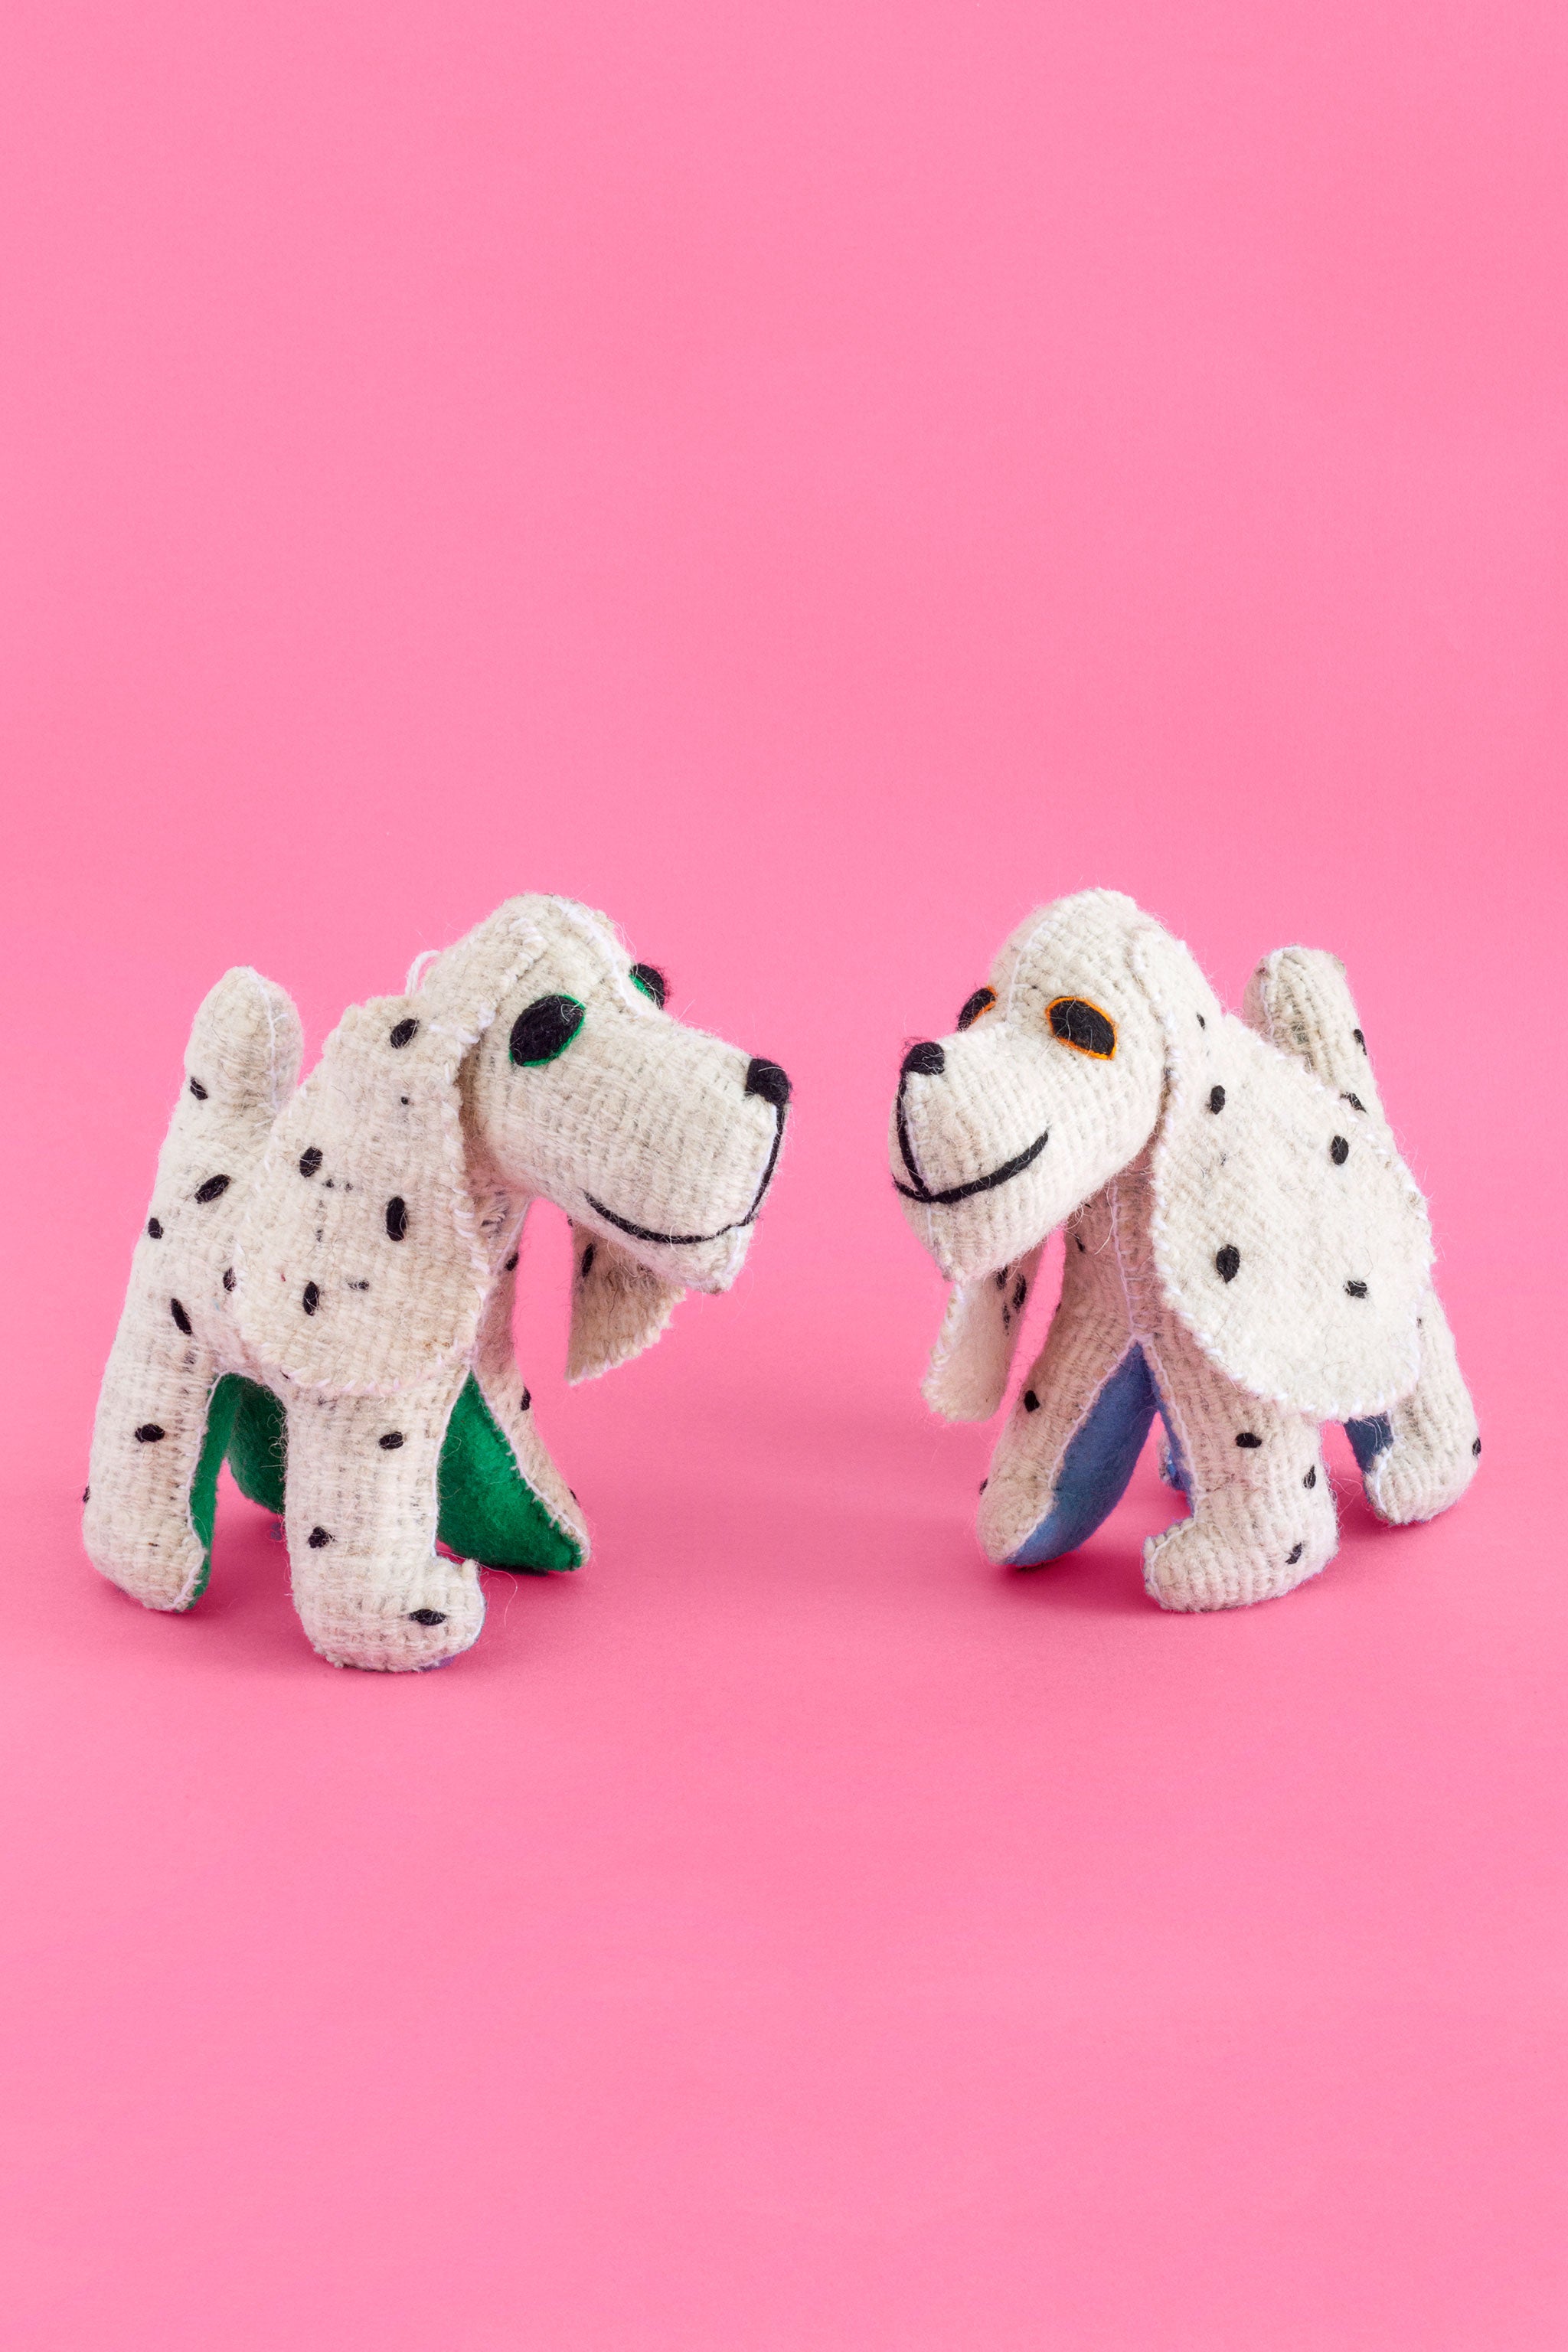 Two white felt Dalmatian plush toys with hand-embroidered black spots and features.